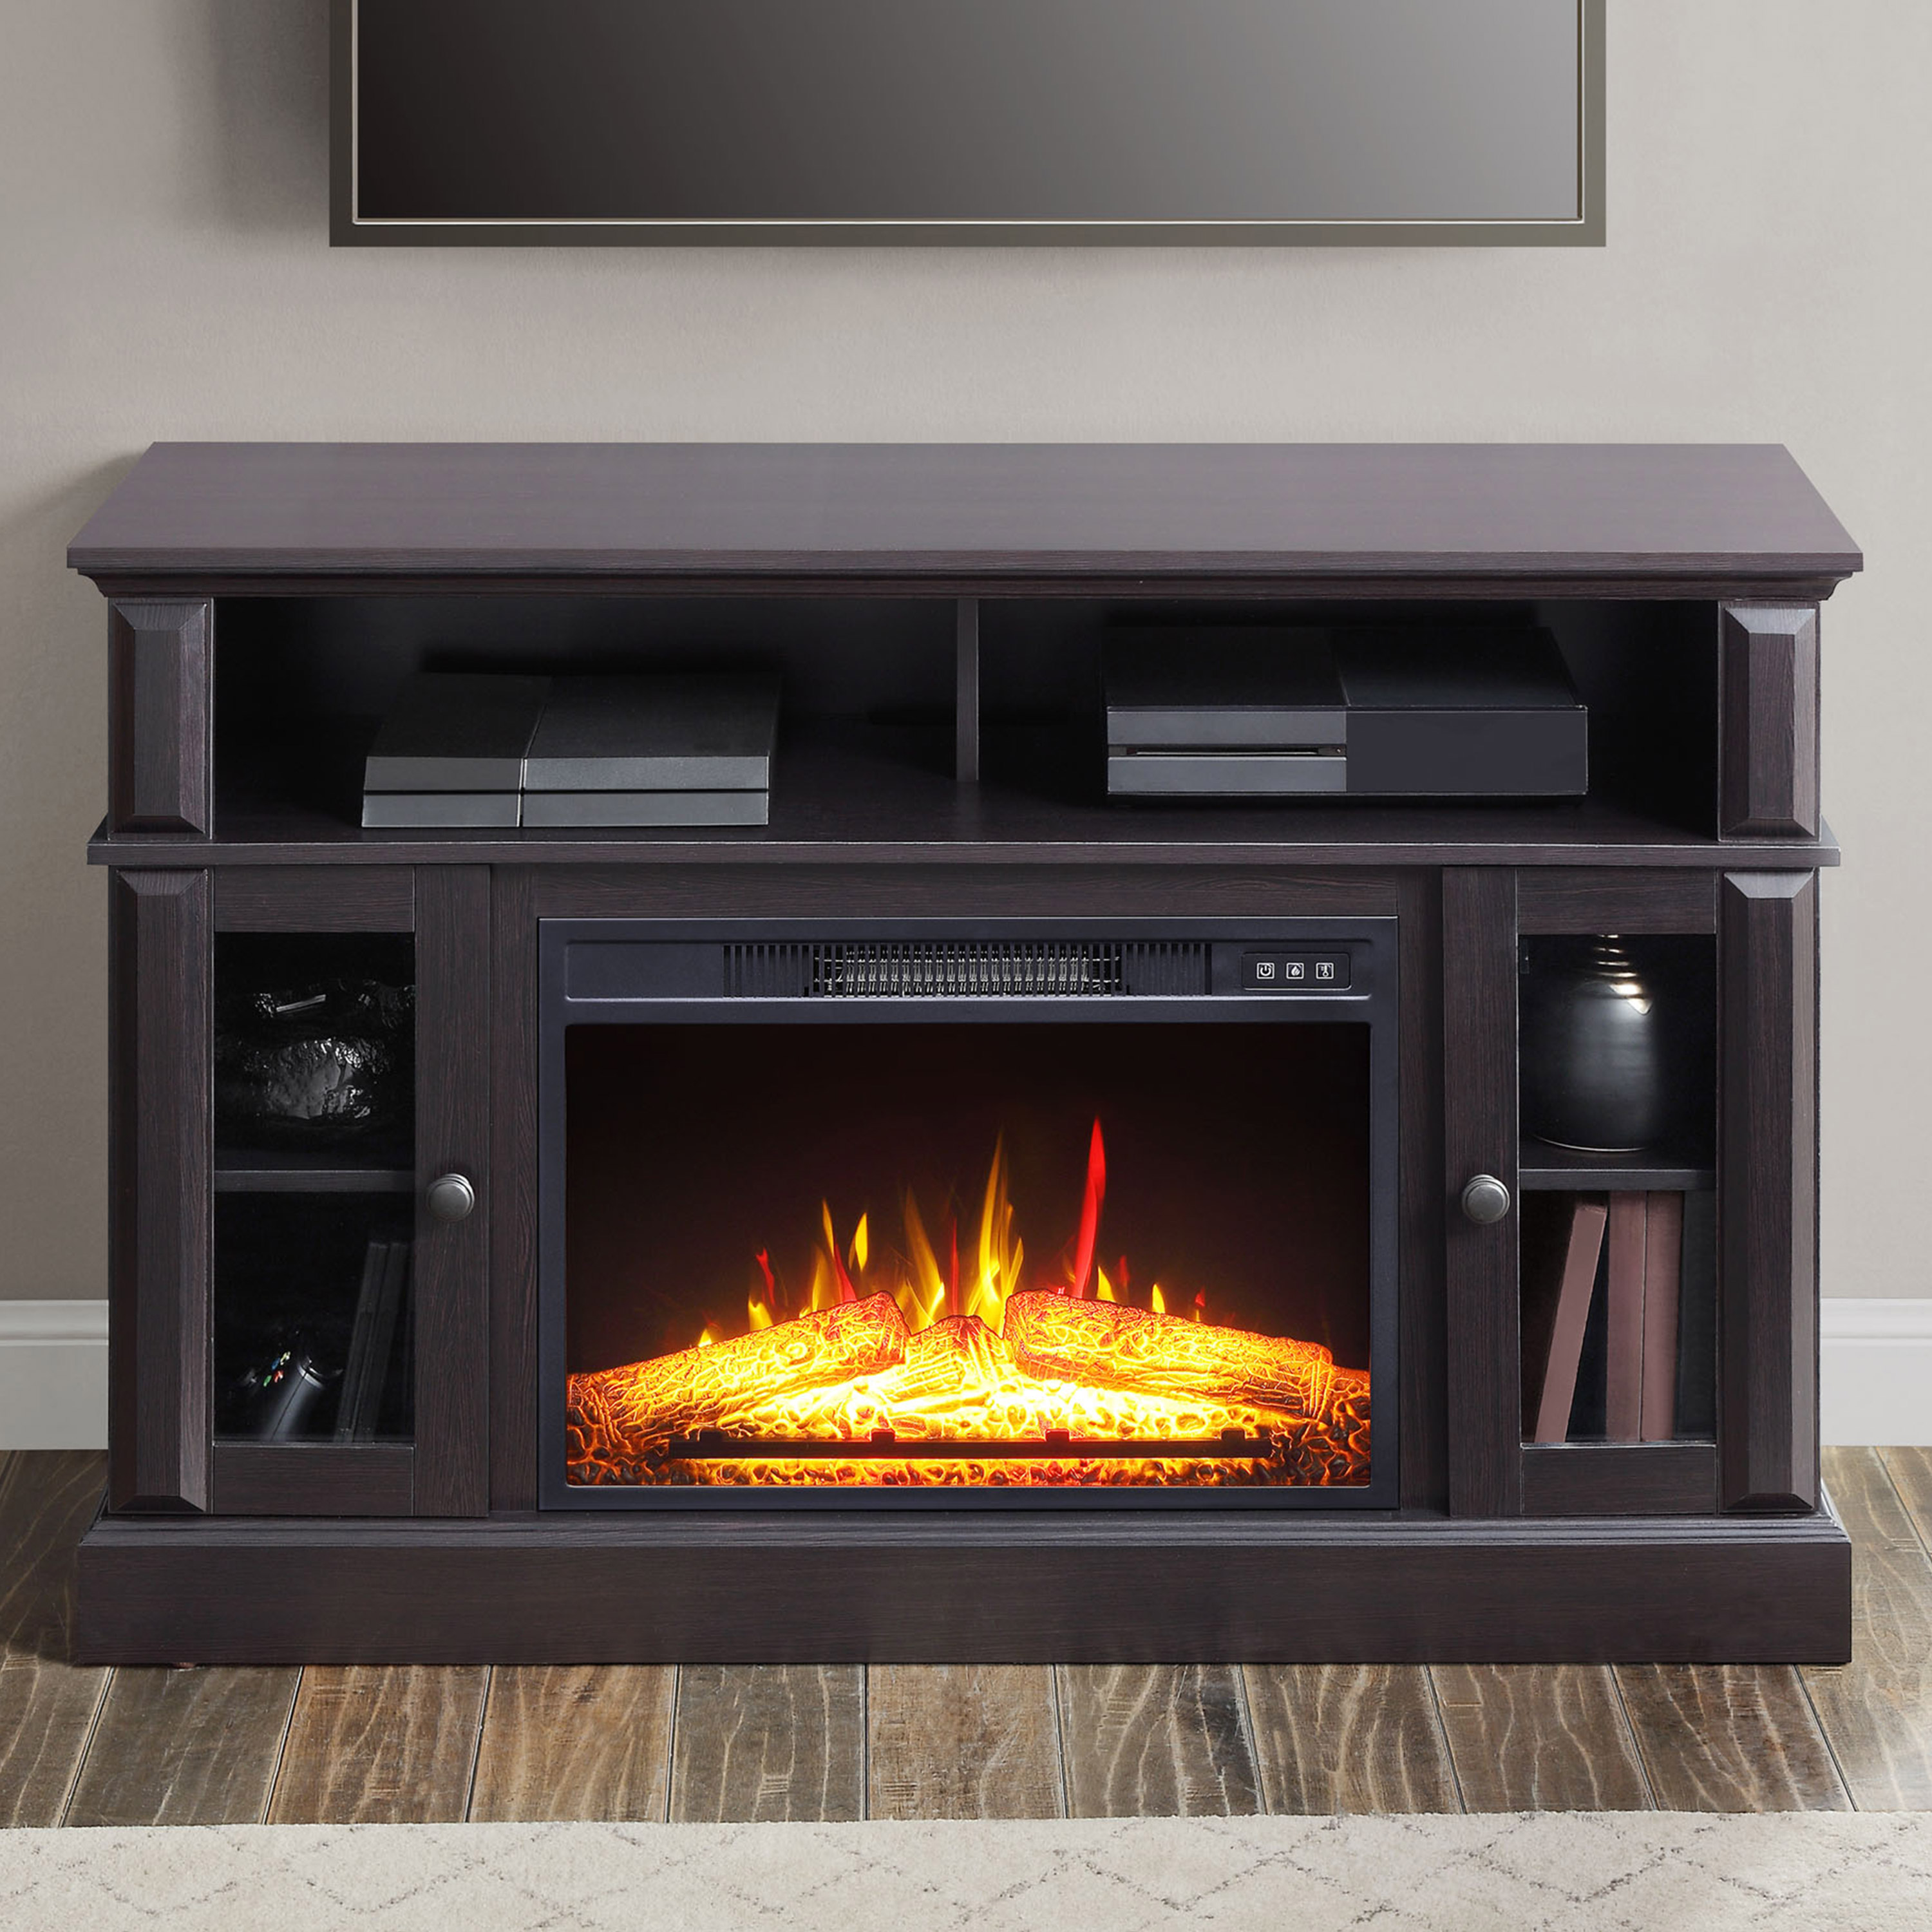 Whalen Barston Media Fireplace Console for TV's up to 55”, Espresso Finish - image 11 of 11